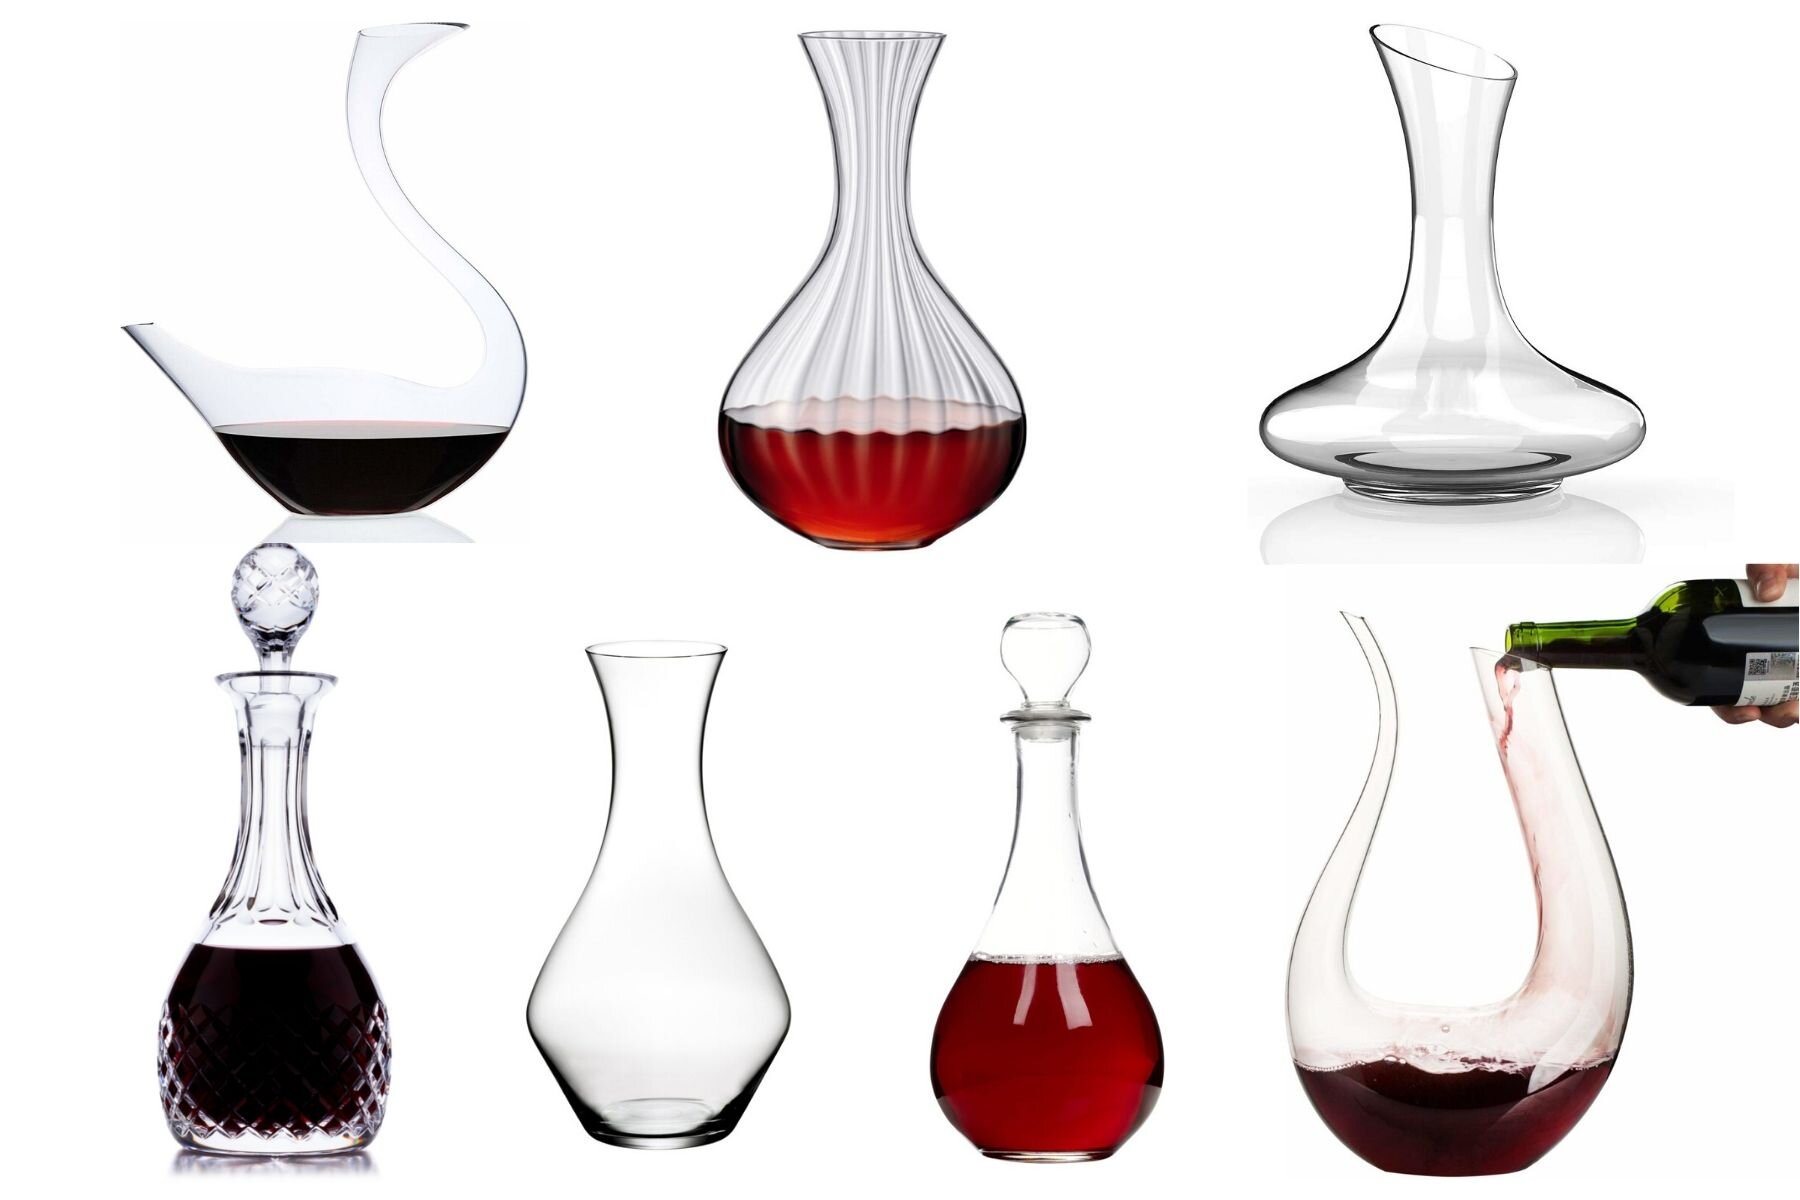 Image of various types of wine decanters